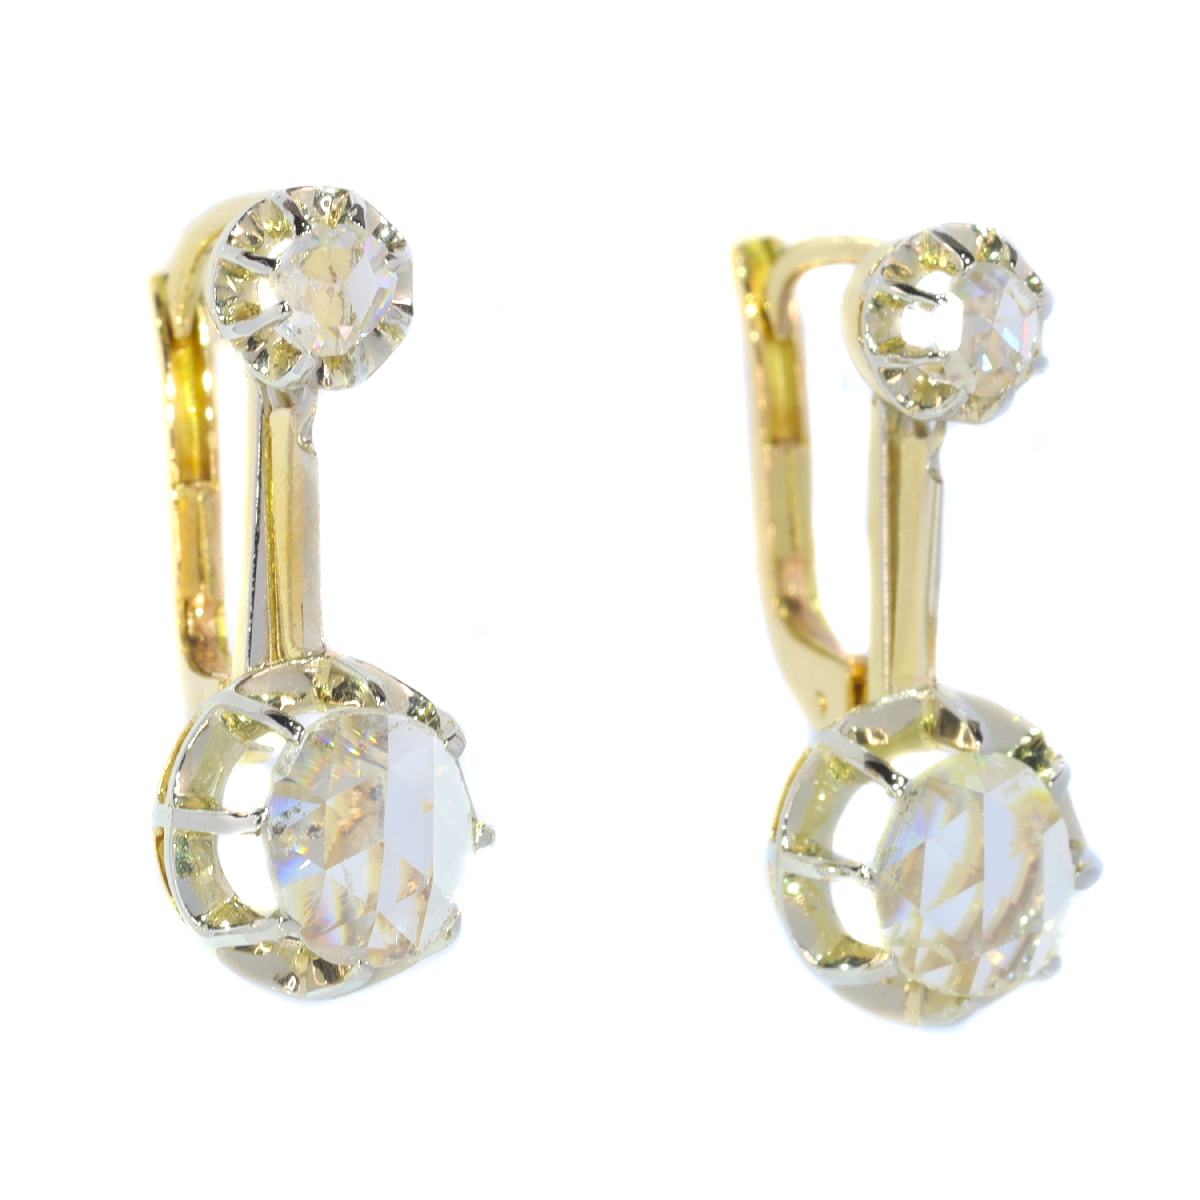 Vintage 1940's earrings with large rose cut diamonds